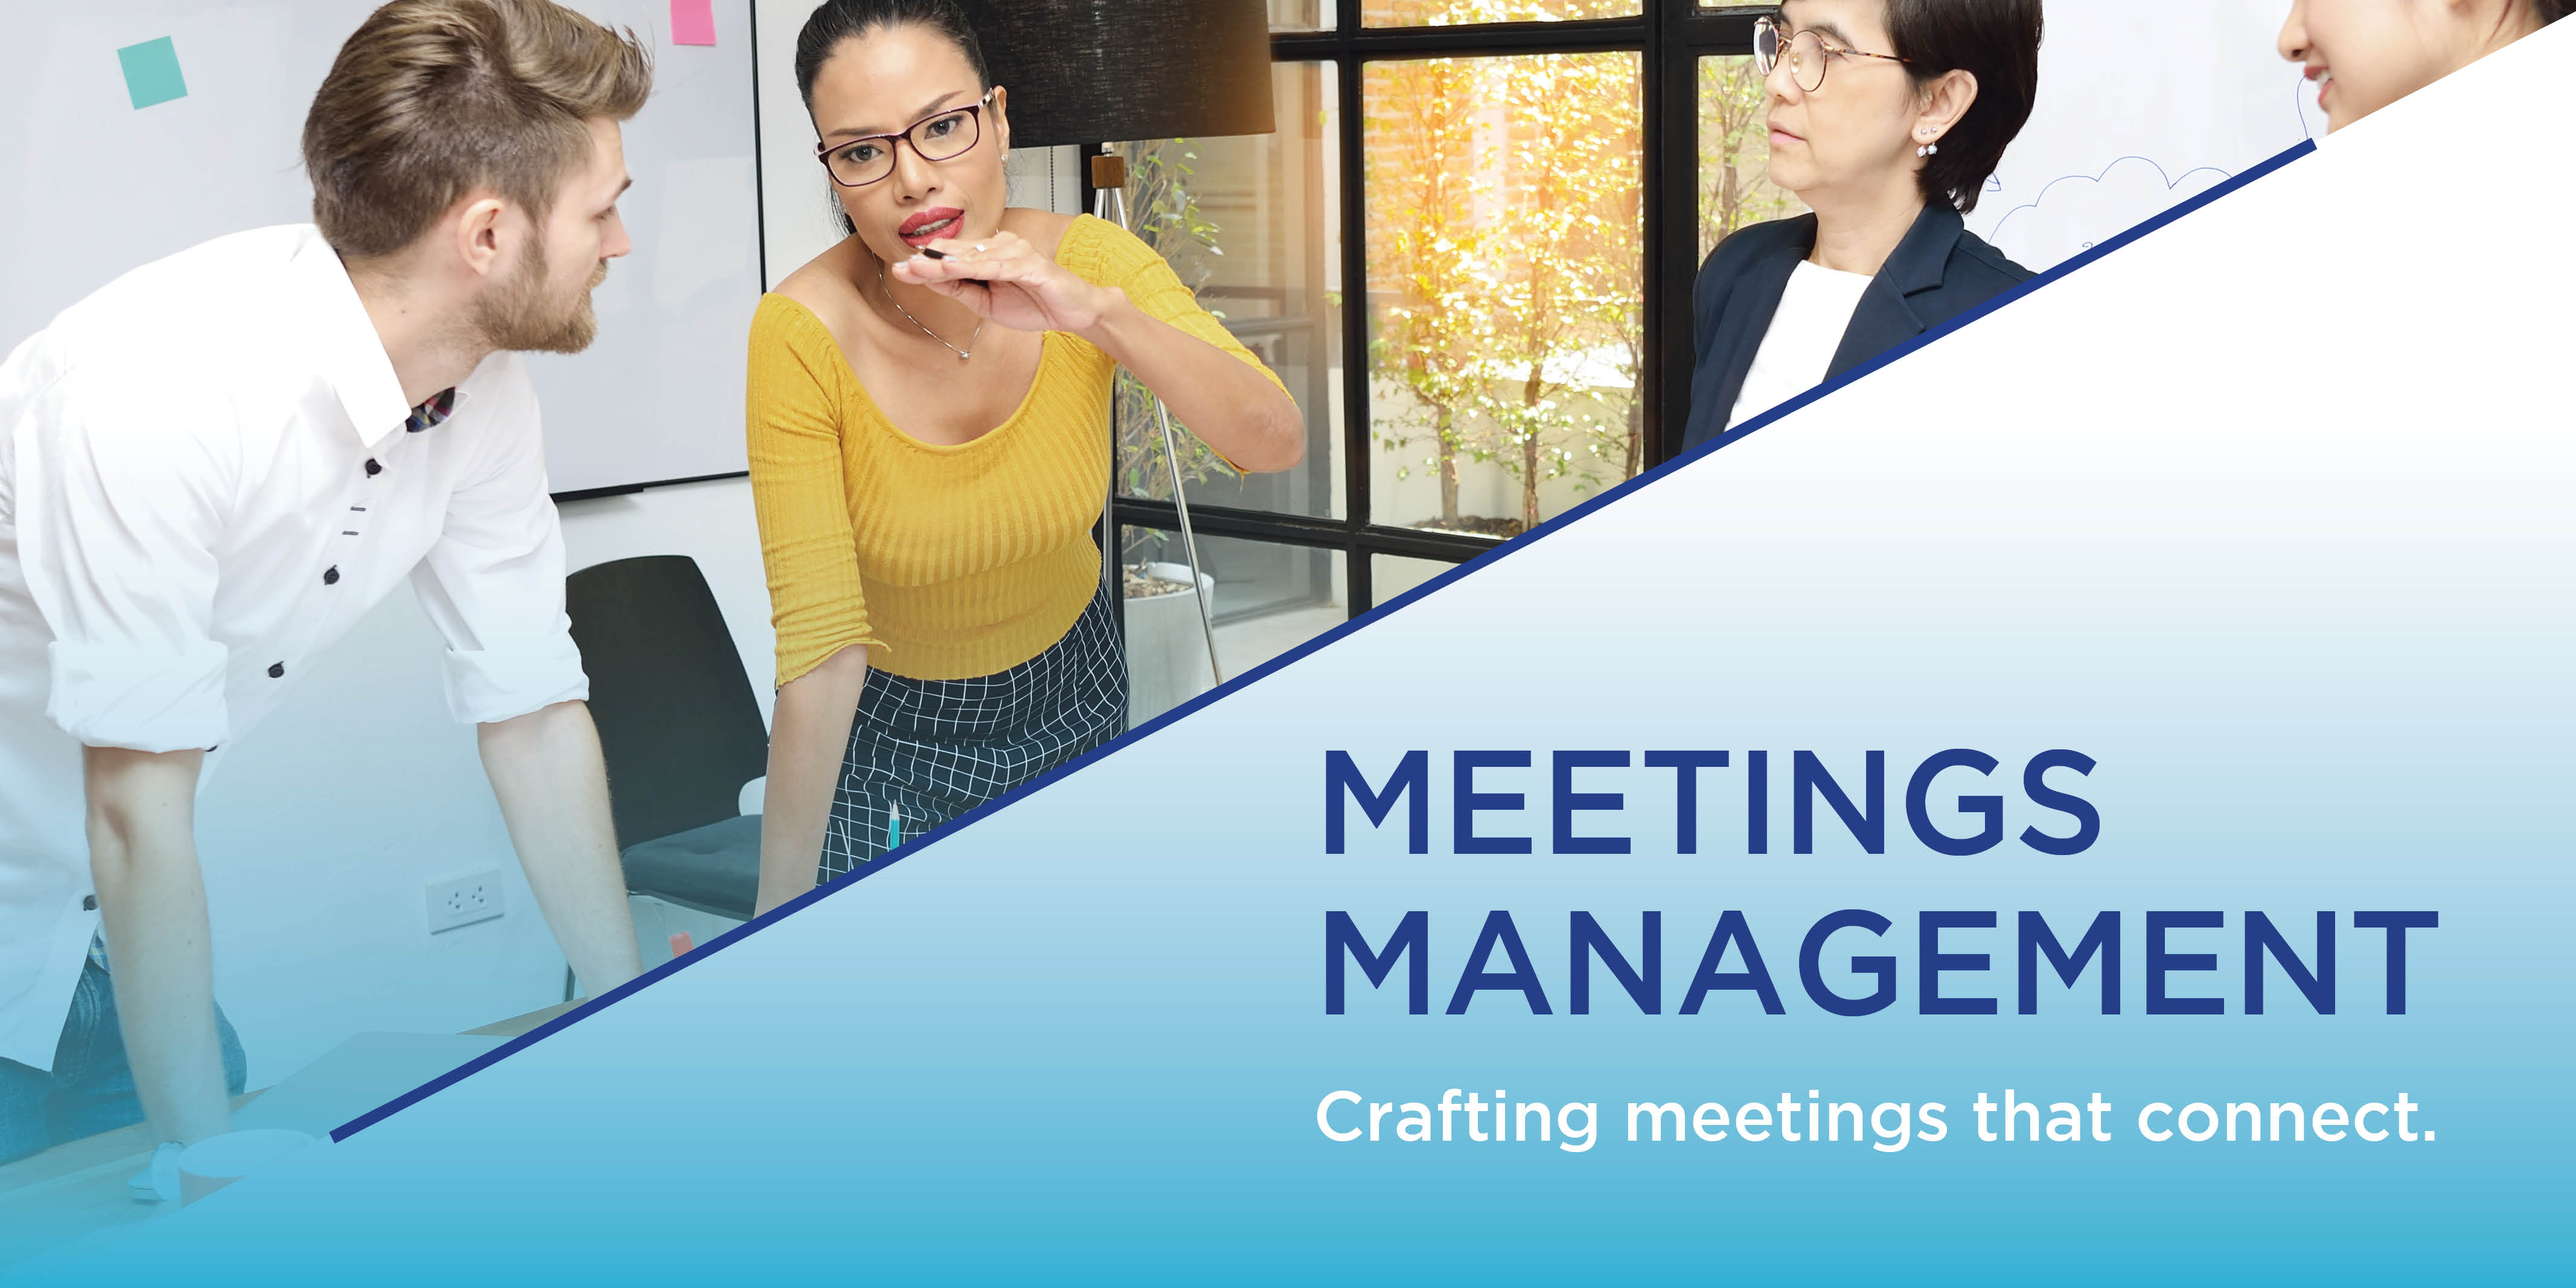 Group of meeting planners working in conference room | Global agency, BCD Meetings & Events